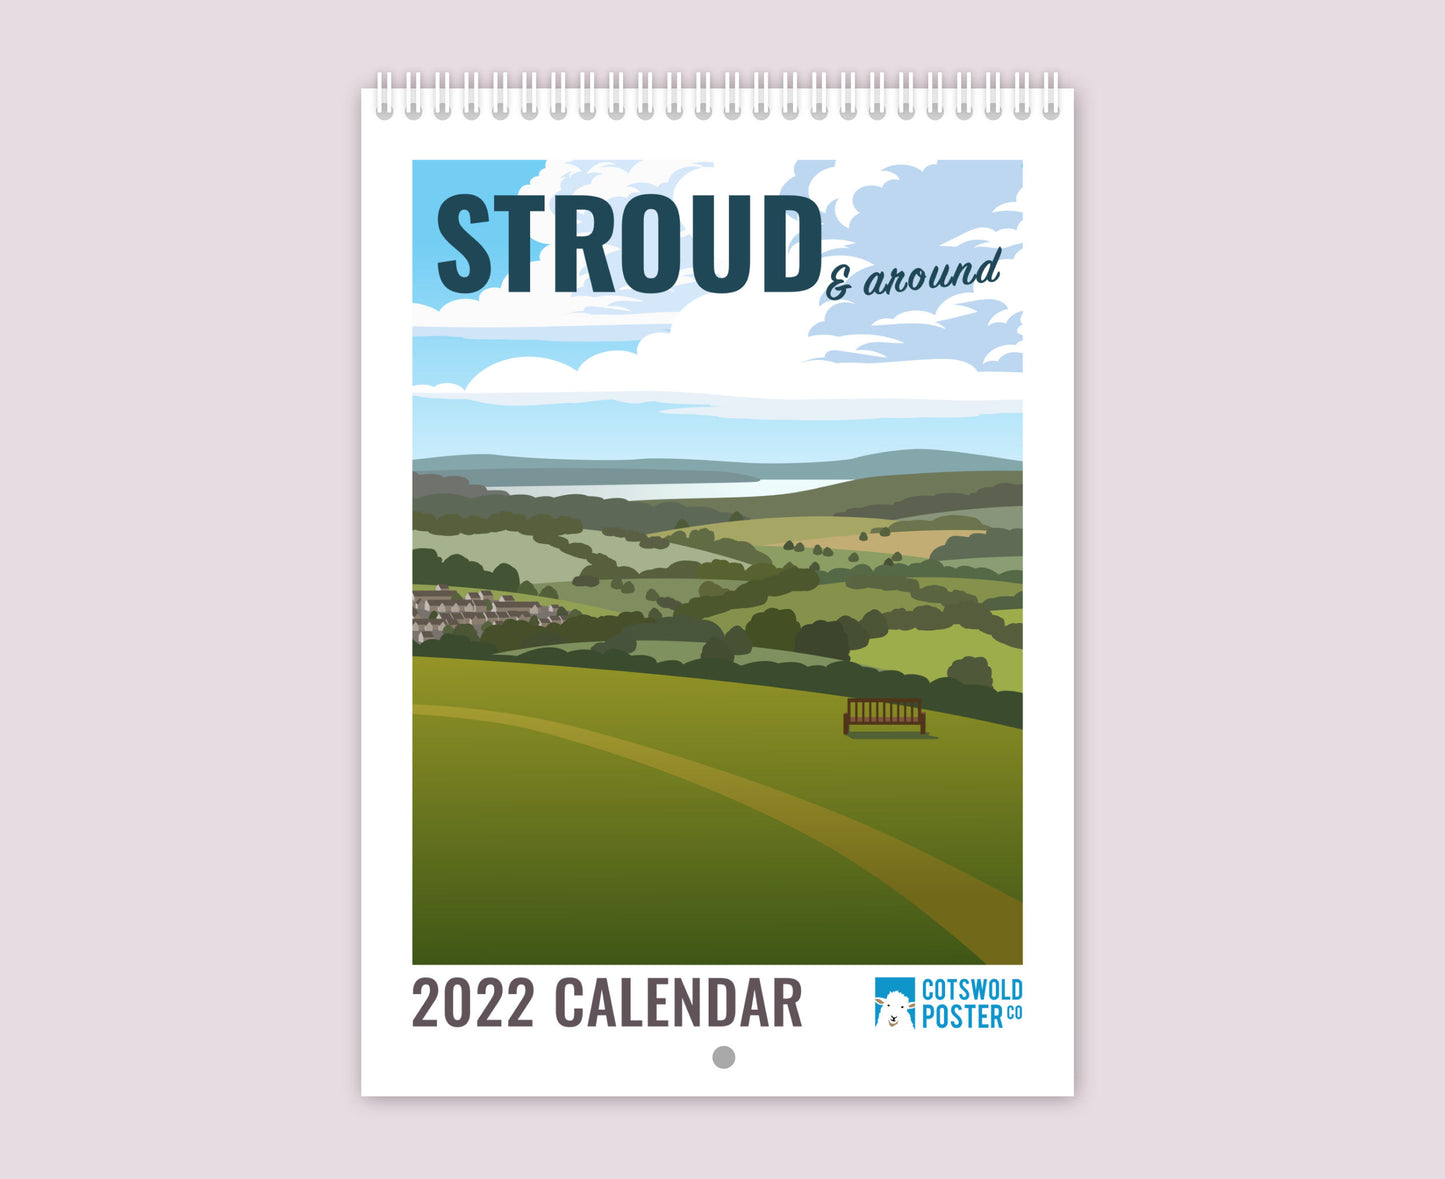 Stroud and Around 2022 Calendar front cover